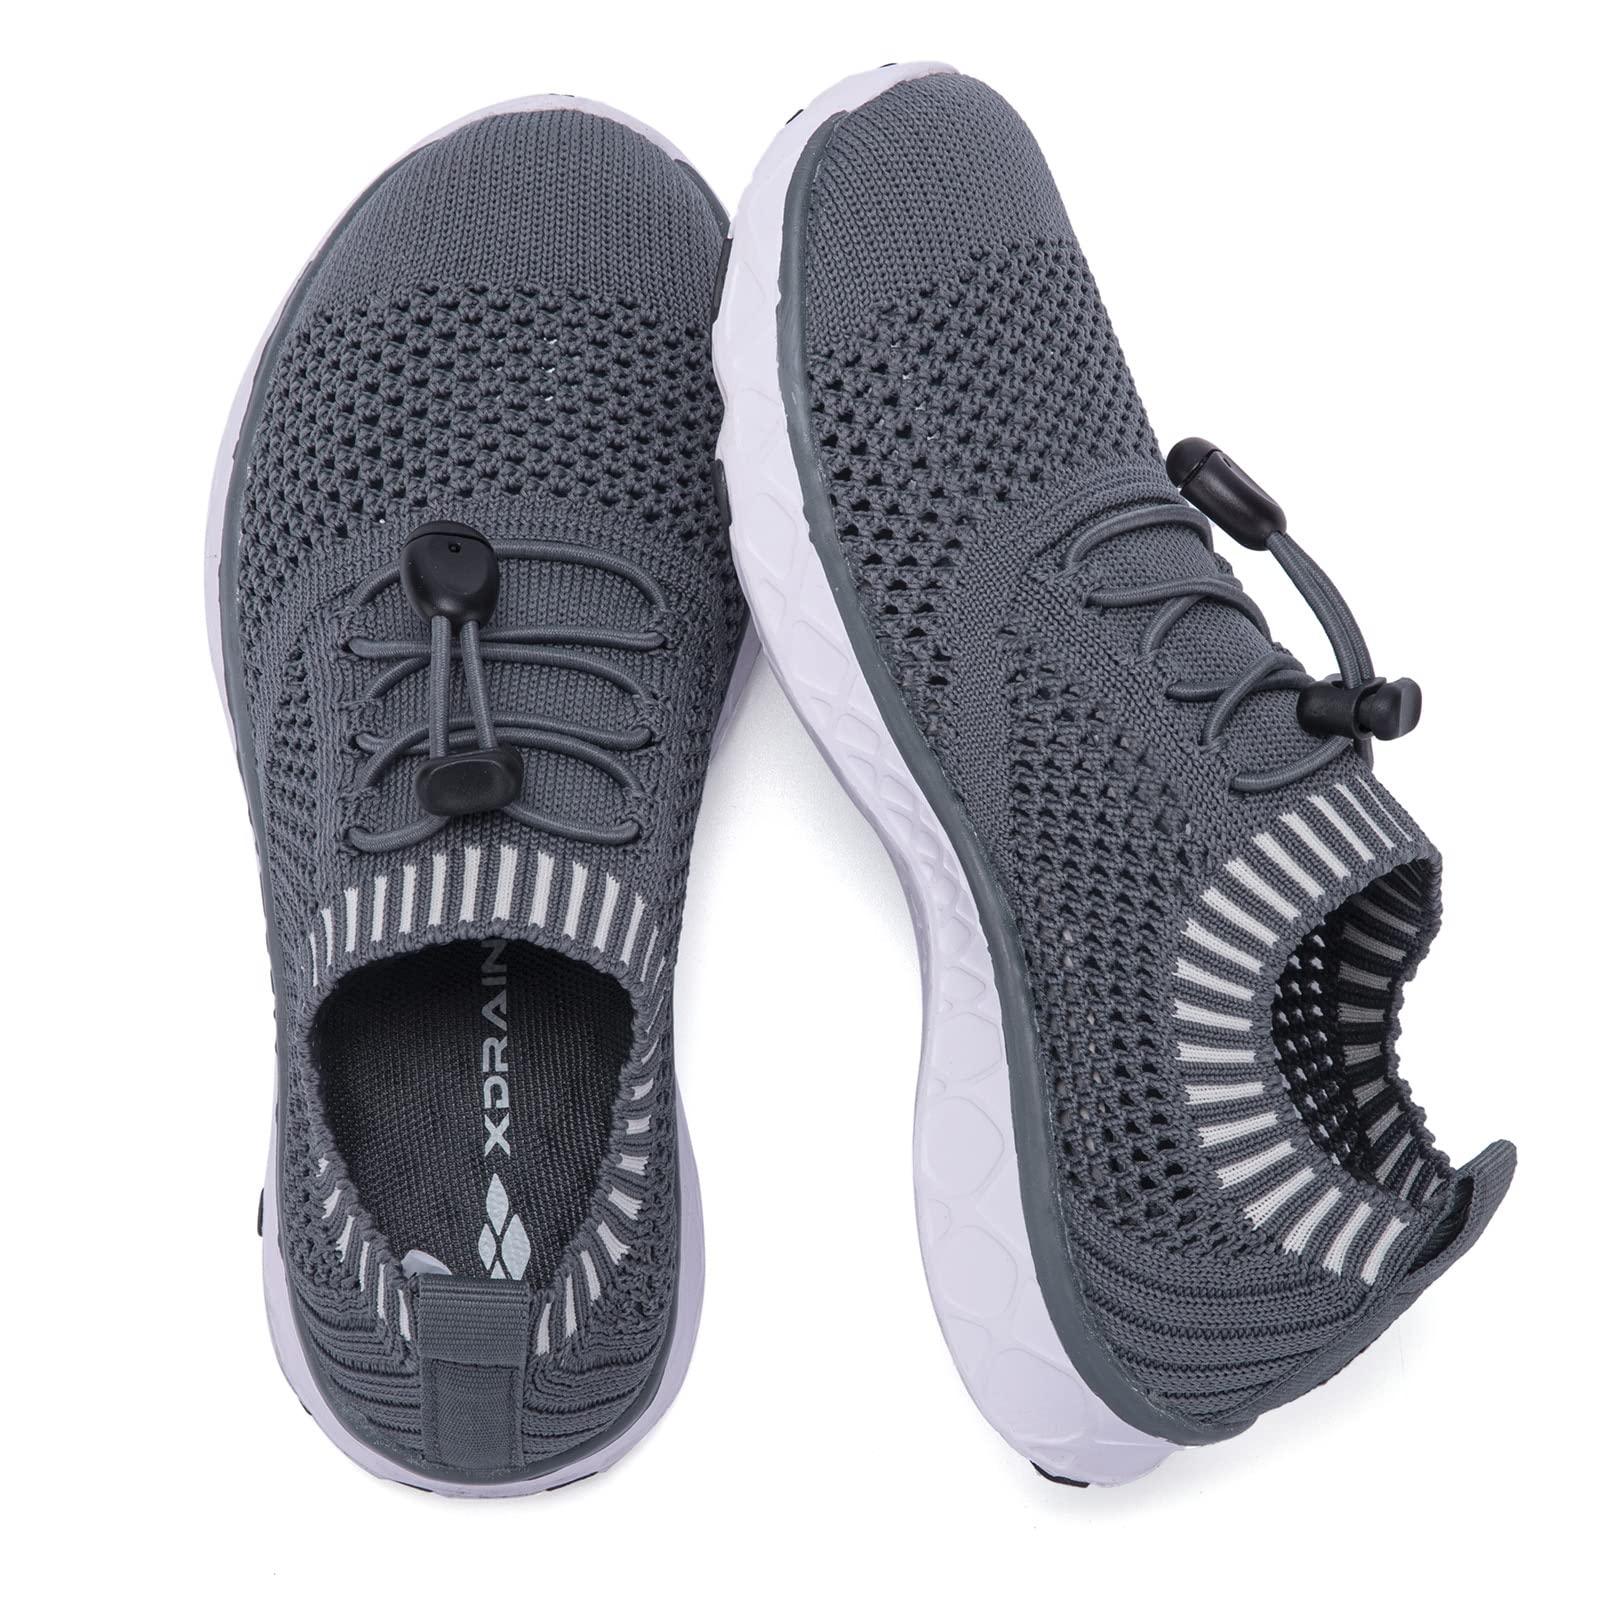 Aleader Xdrain Spero Water Shoes | Breathable & Quick-Drying | – AleaderGear